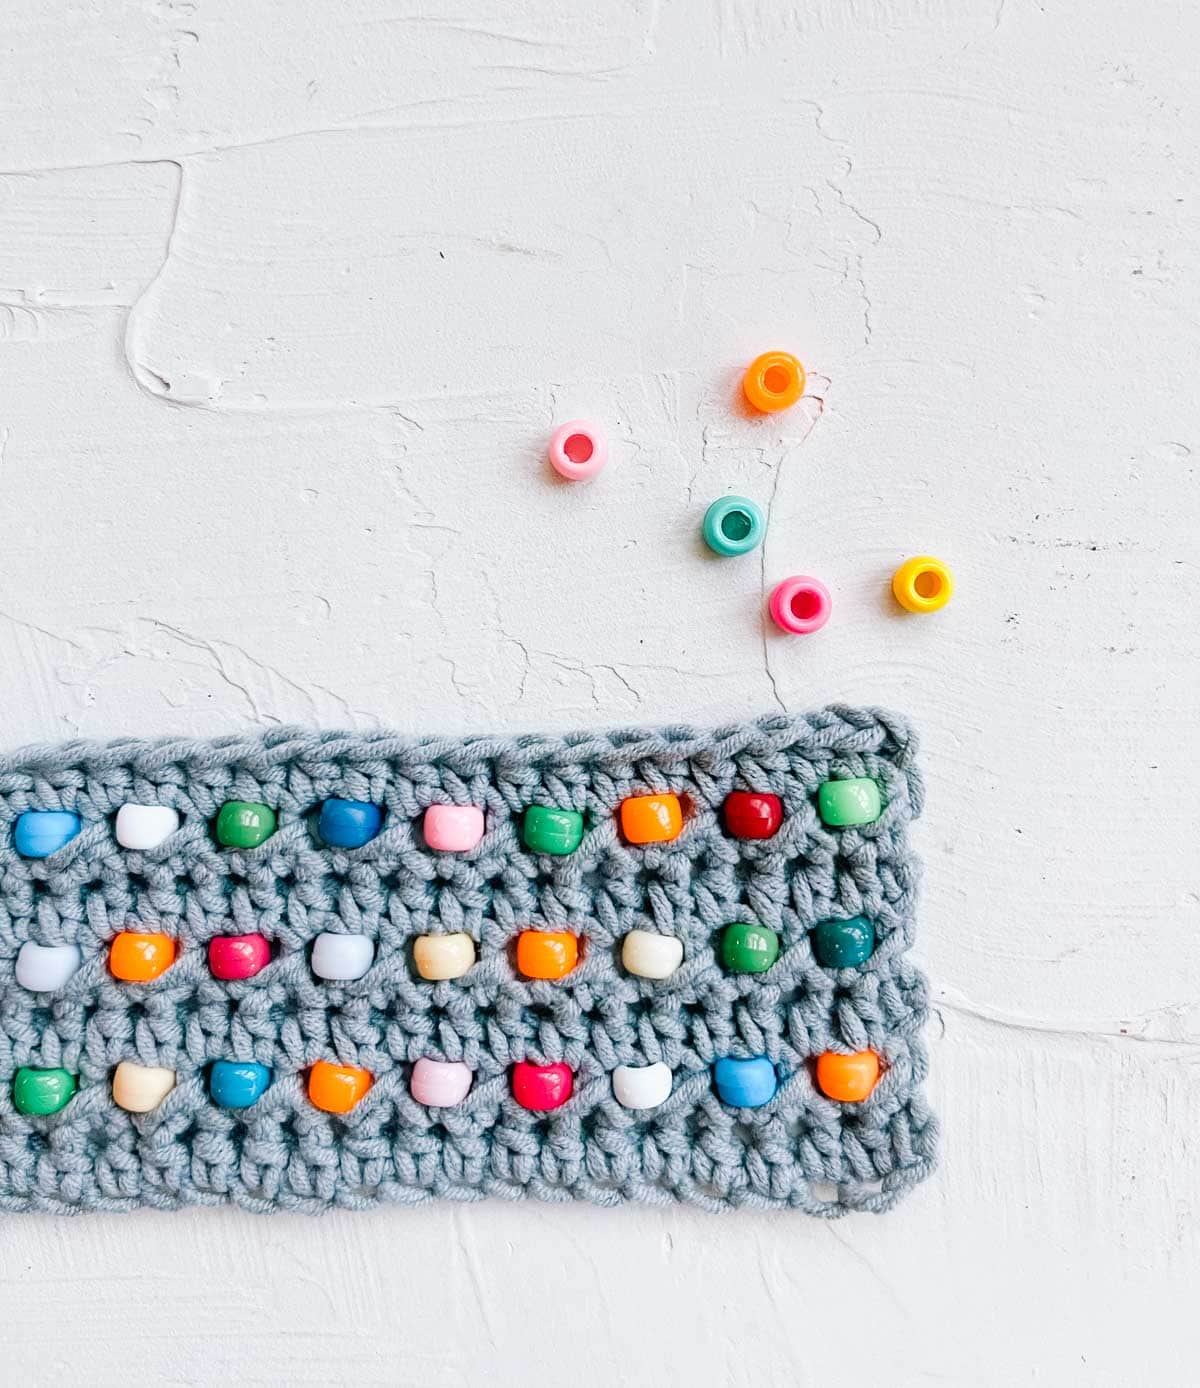 Grey crochet swatch with colorful plastic beads.